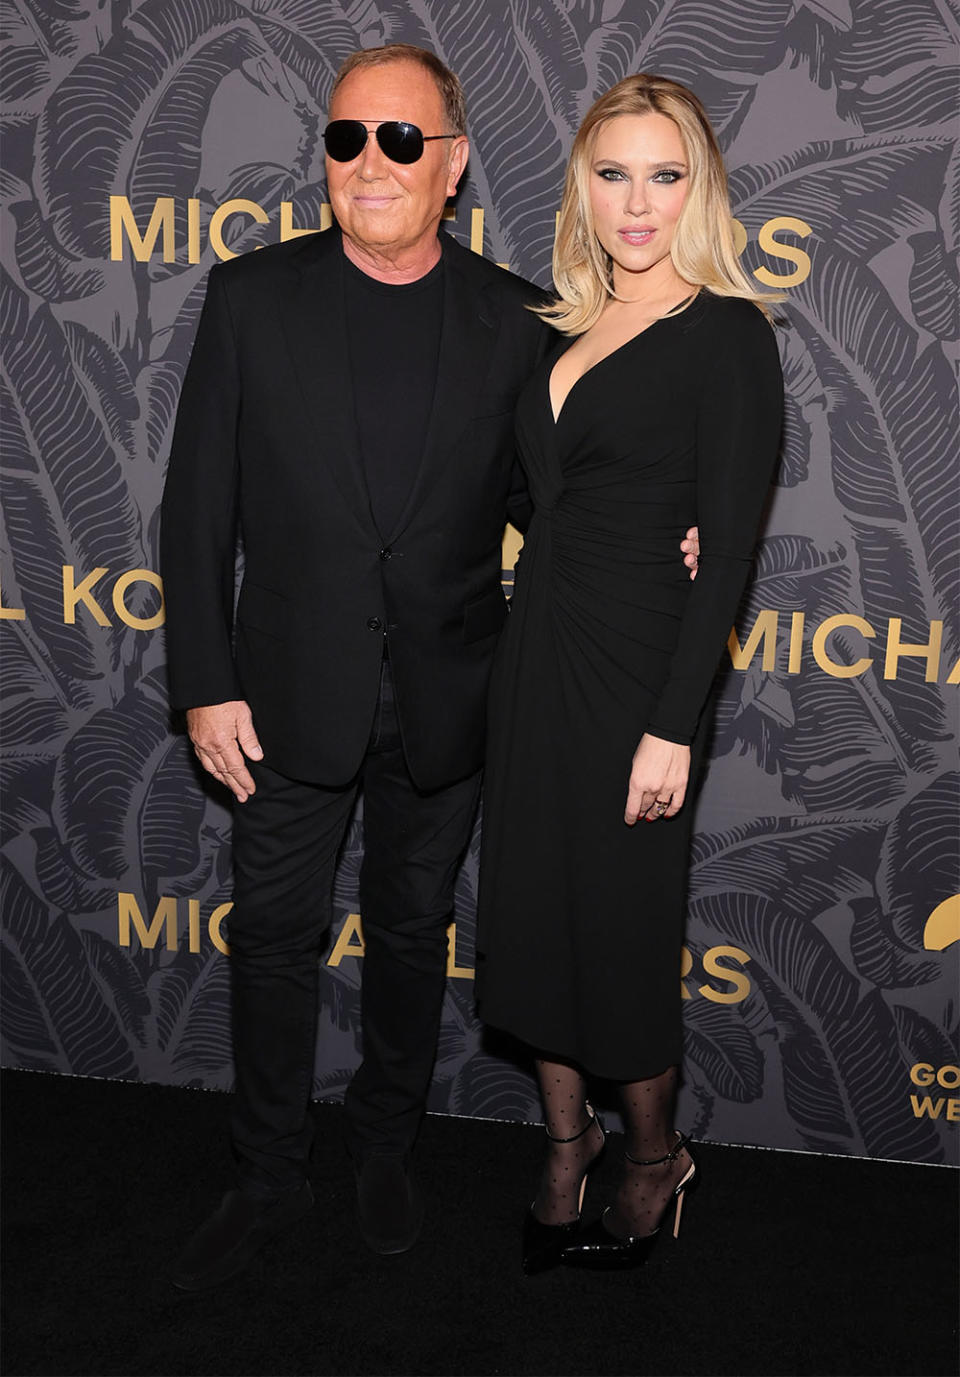 Michael Kors and Scarlett Johansson attend the 2023 God's Love We Deliver Golden Heart Awards at The Glasshouse on October 16, 2023 in New York City.